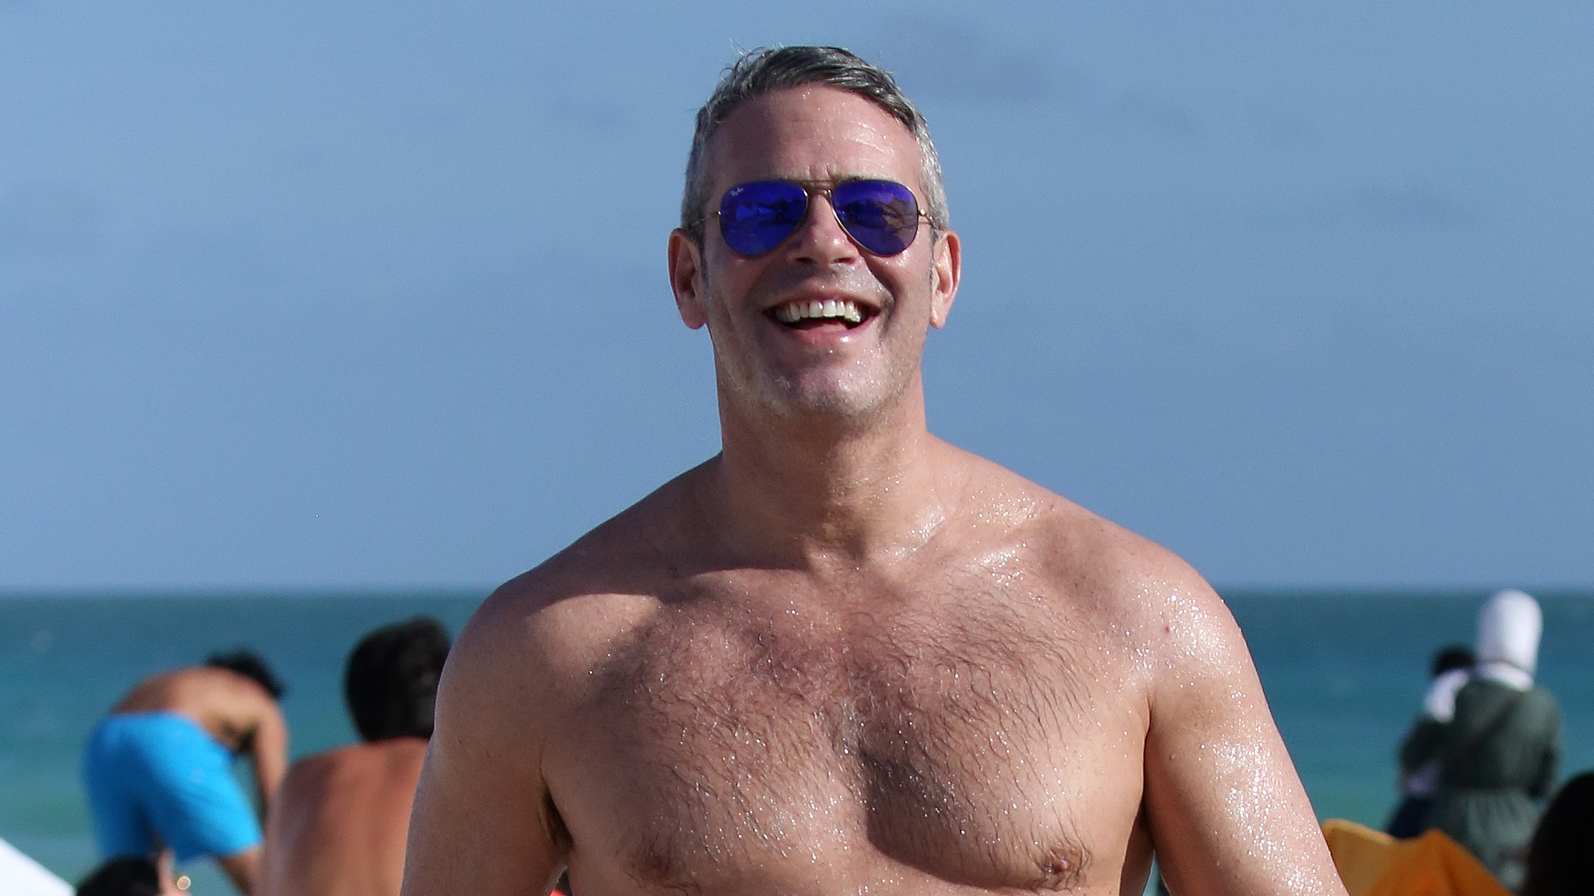 Andy Cohen Gay